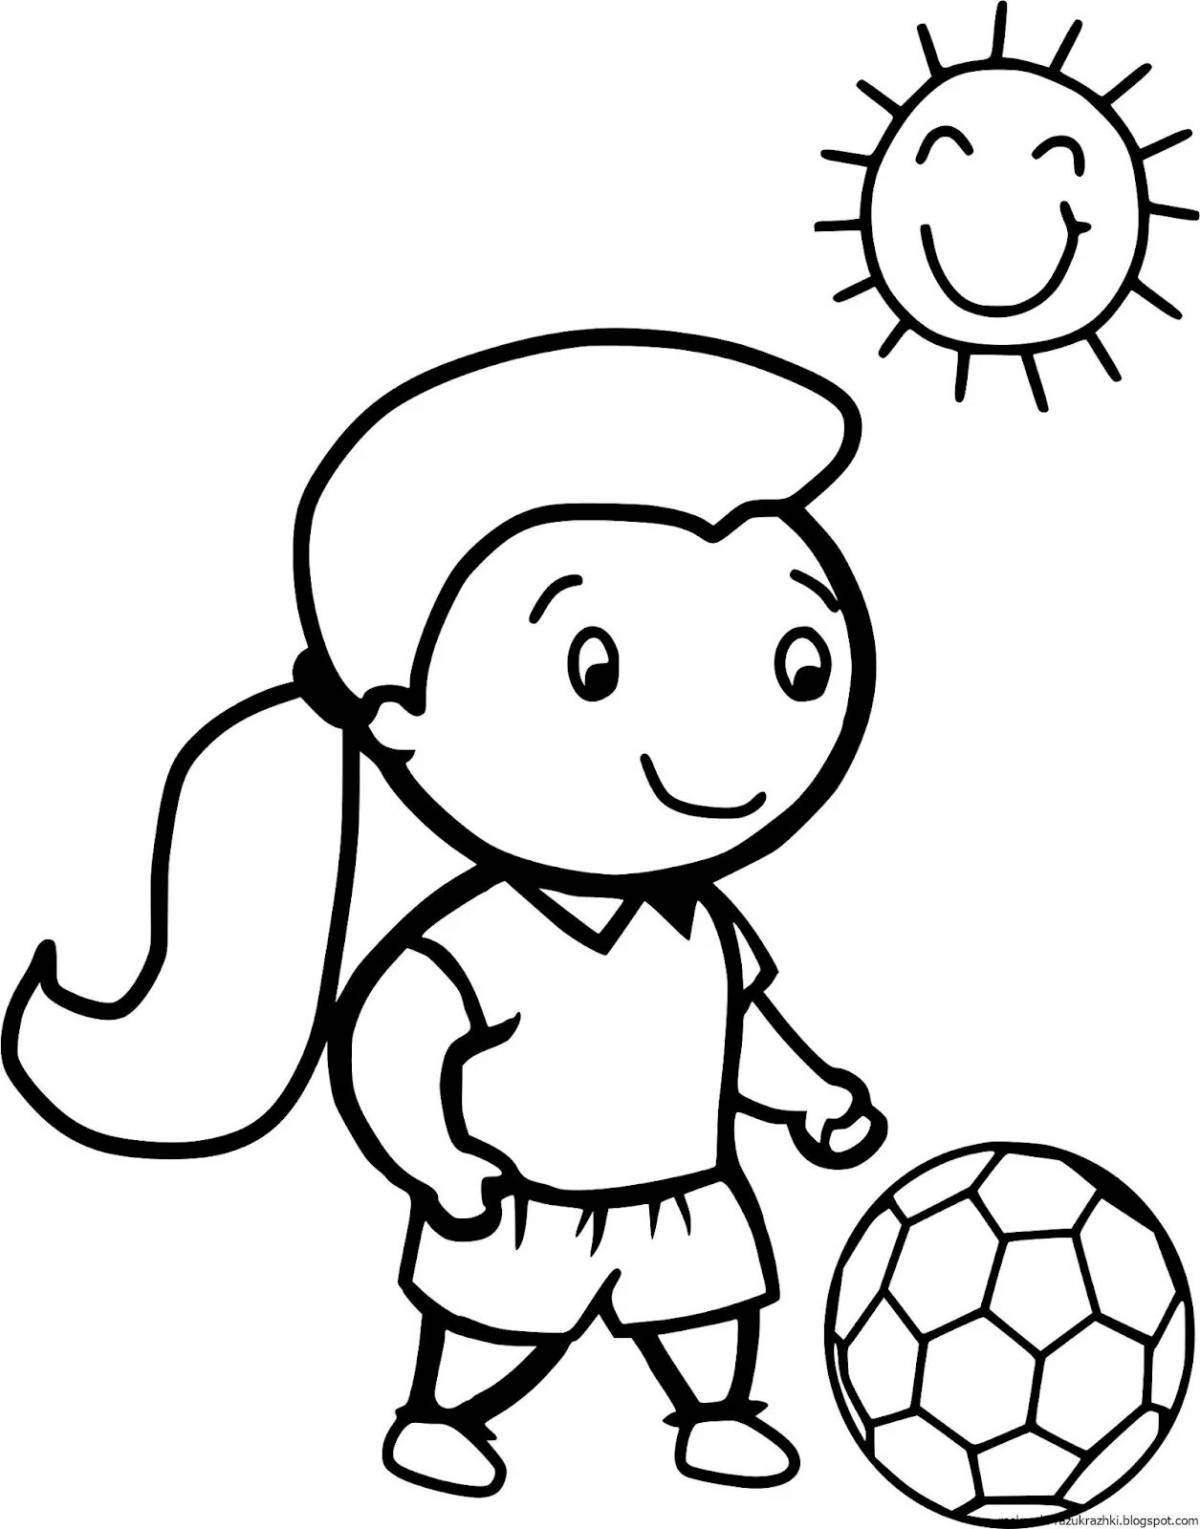 Playful sports coloring book for 4-5 year olds